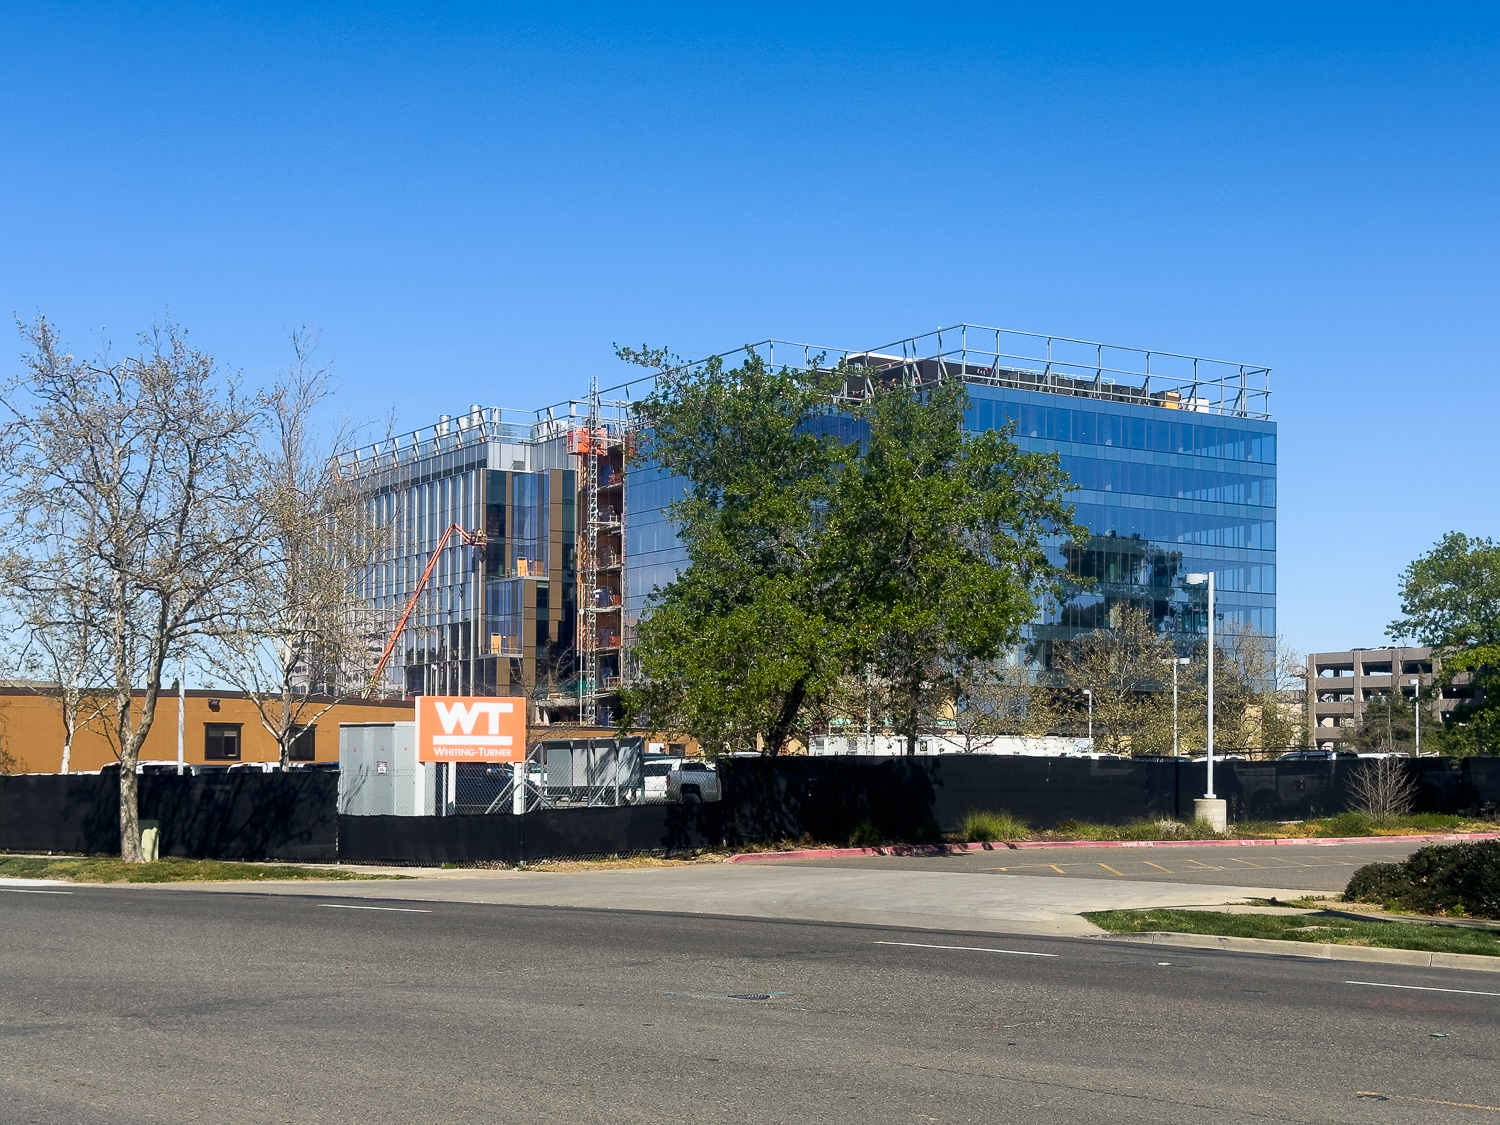 300 Aggie Square seen from Stockton Boulevard, image by author